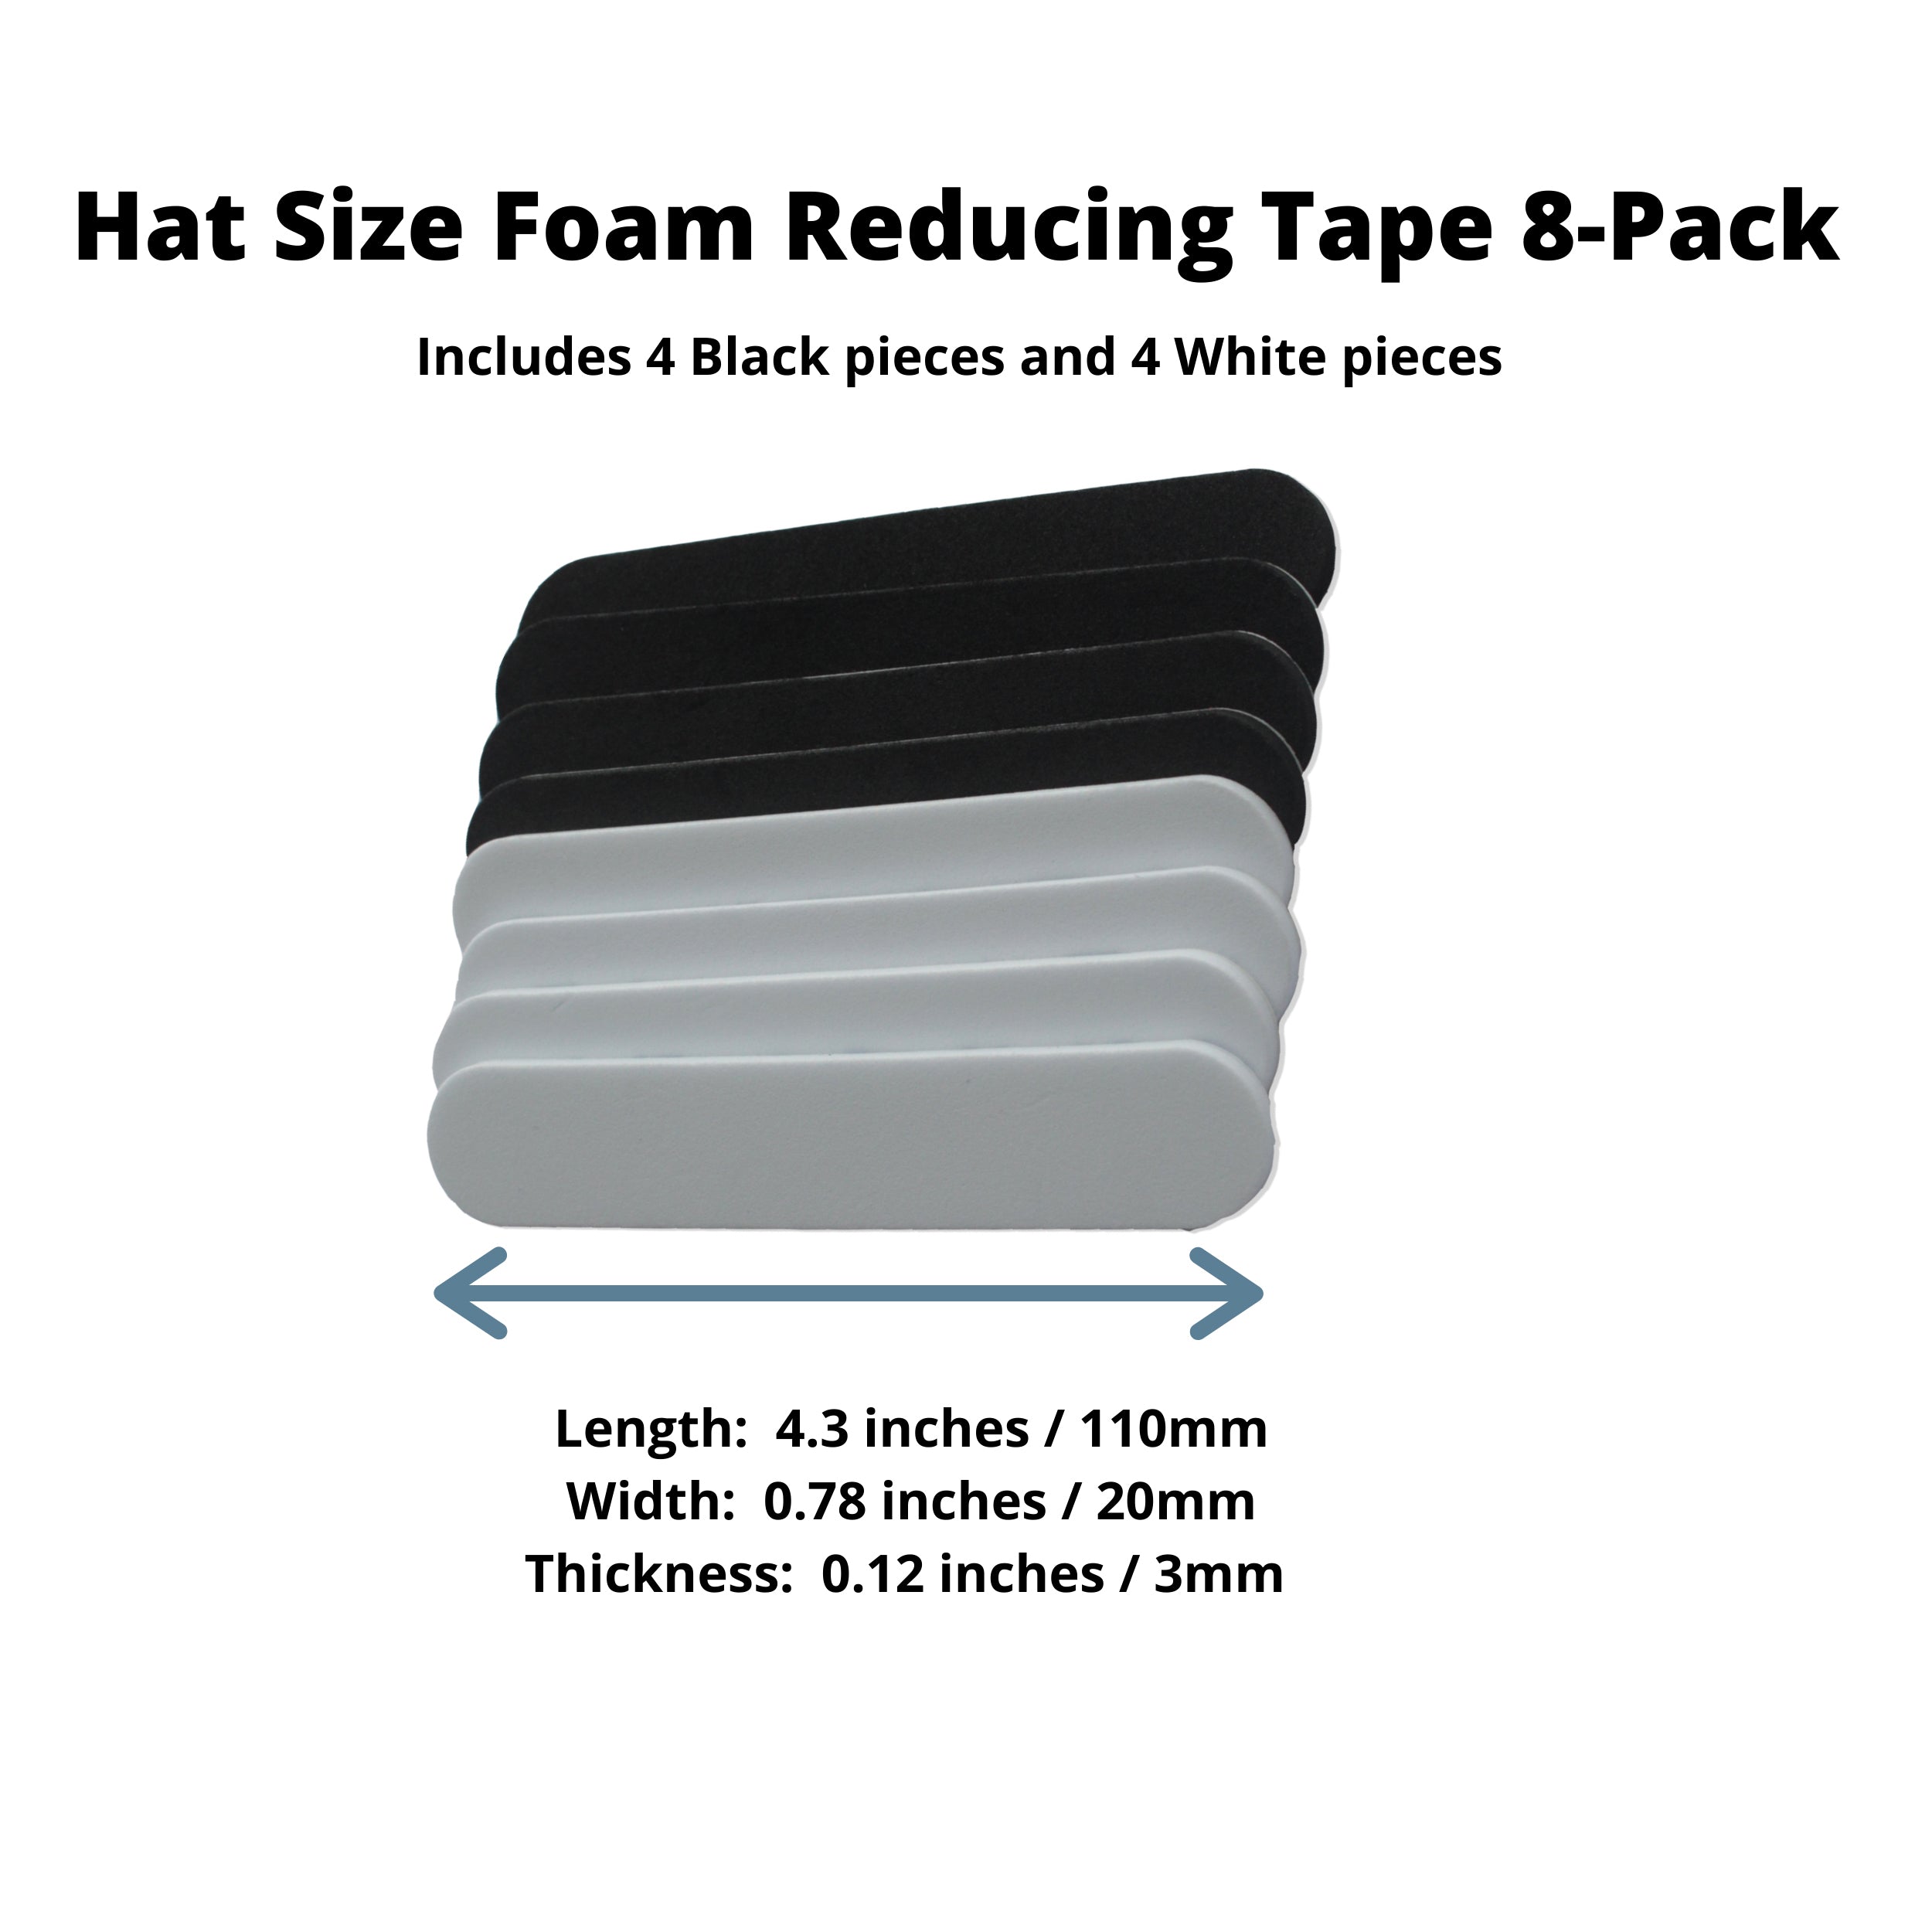 12 Pcs Hat Sizing Tape Hat Size Reducer Foam Reducing Tape for